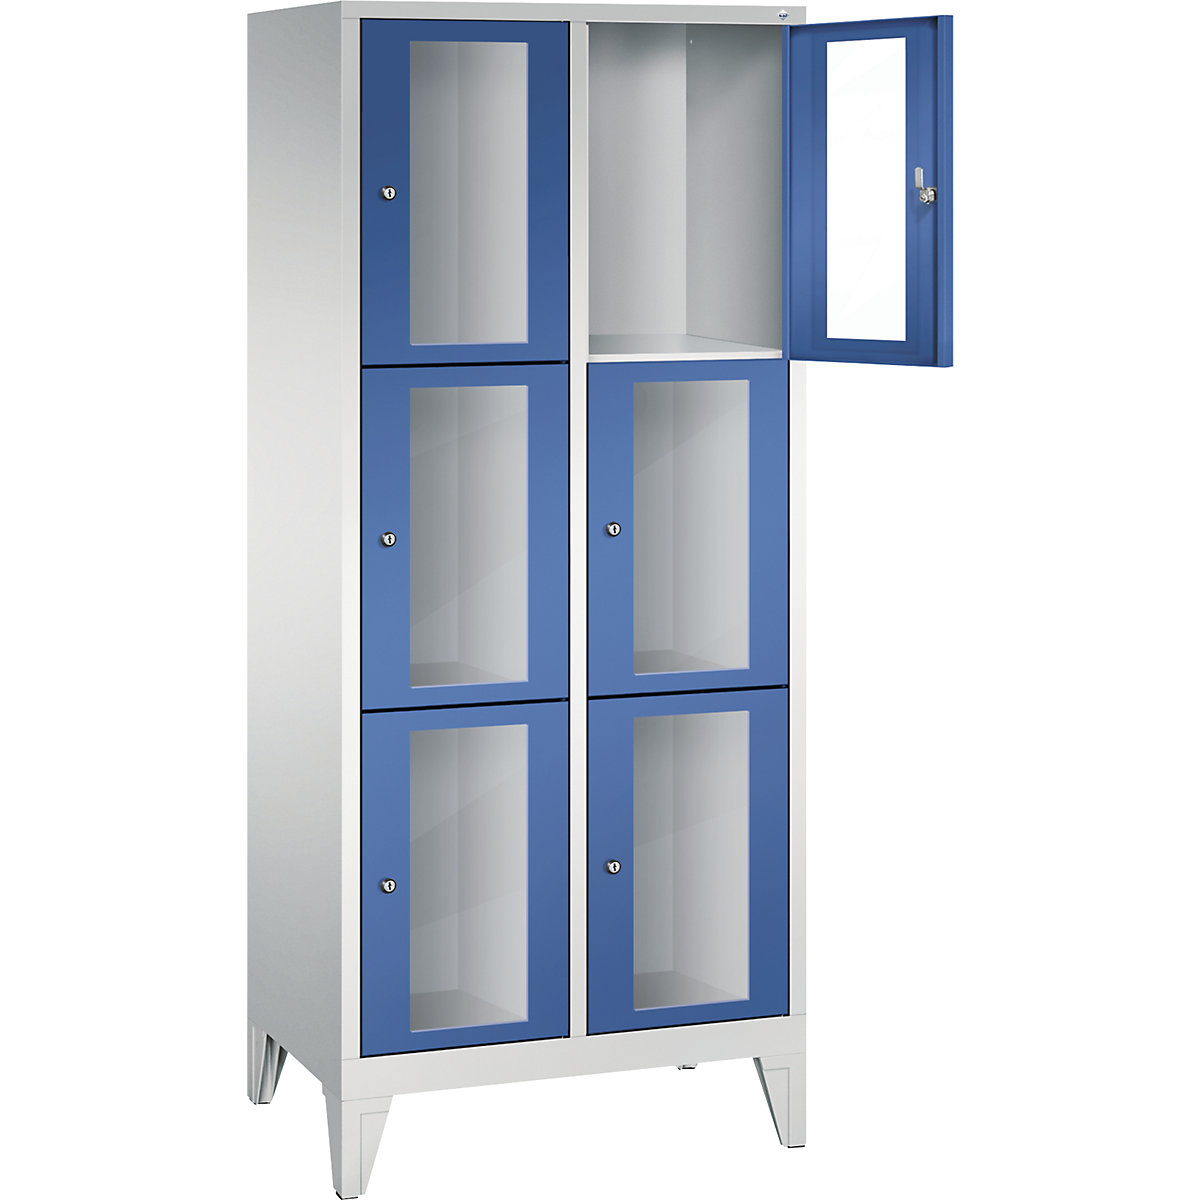 C+P – CLASSIC locker unit, compartment height 510 mm, with feet, 6 compartments, width 810 mm, gentian blue door